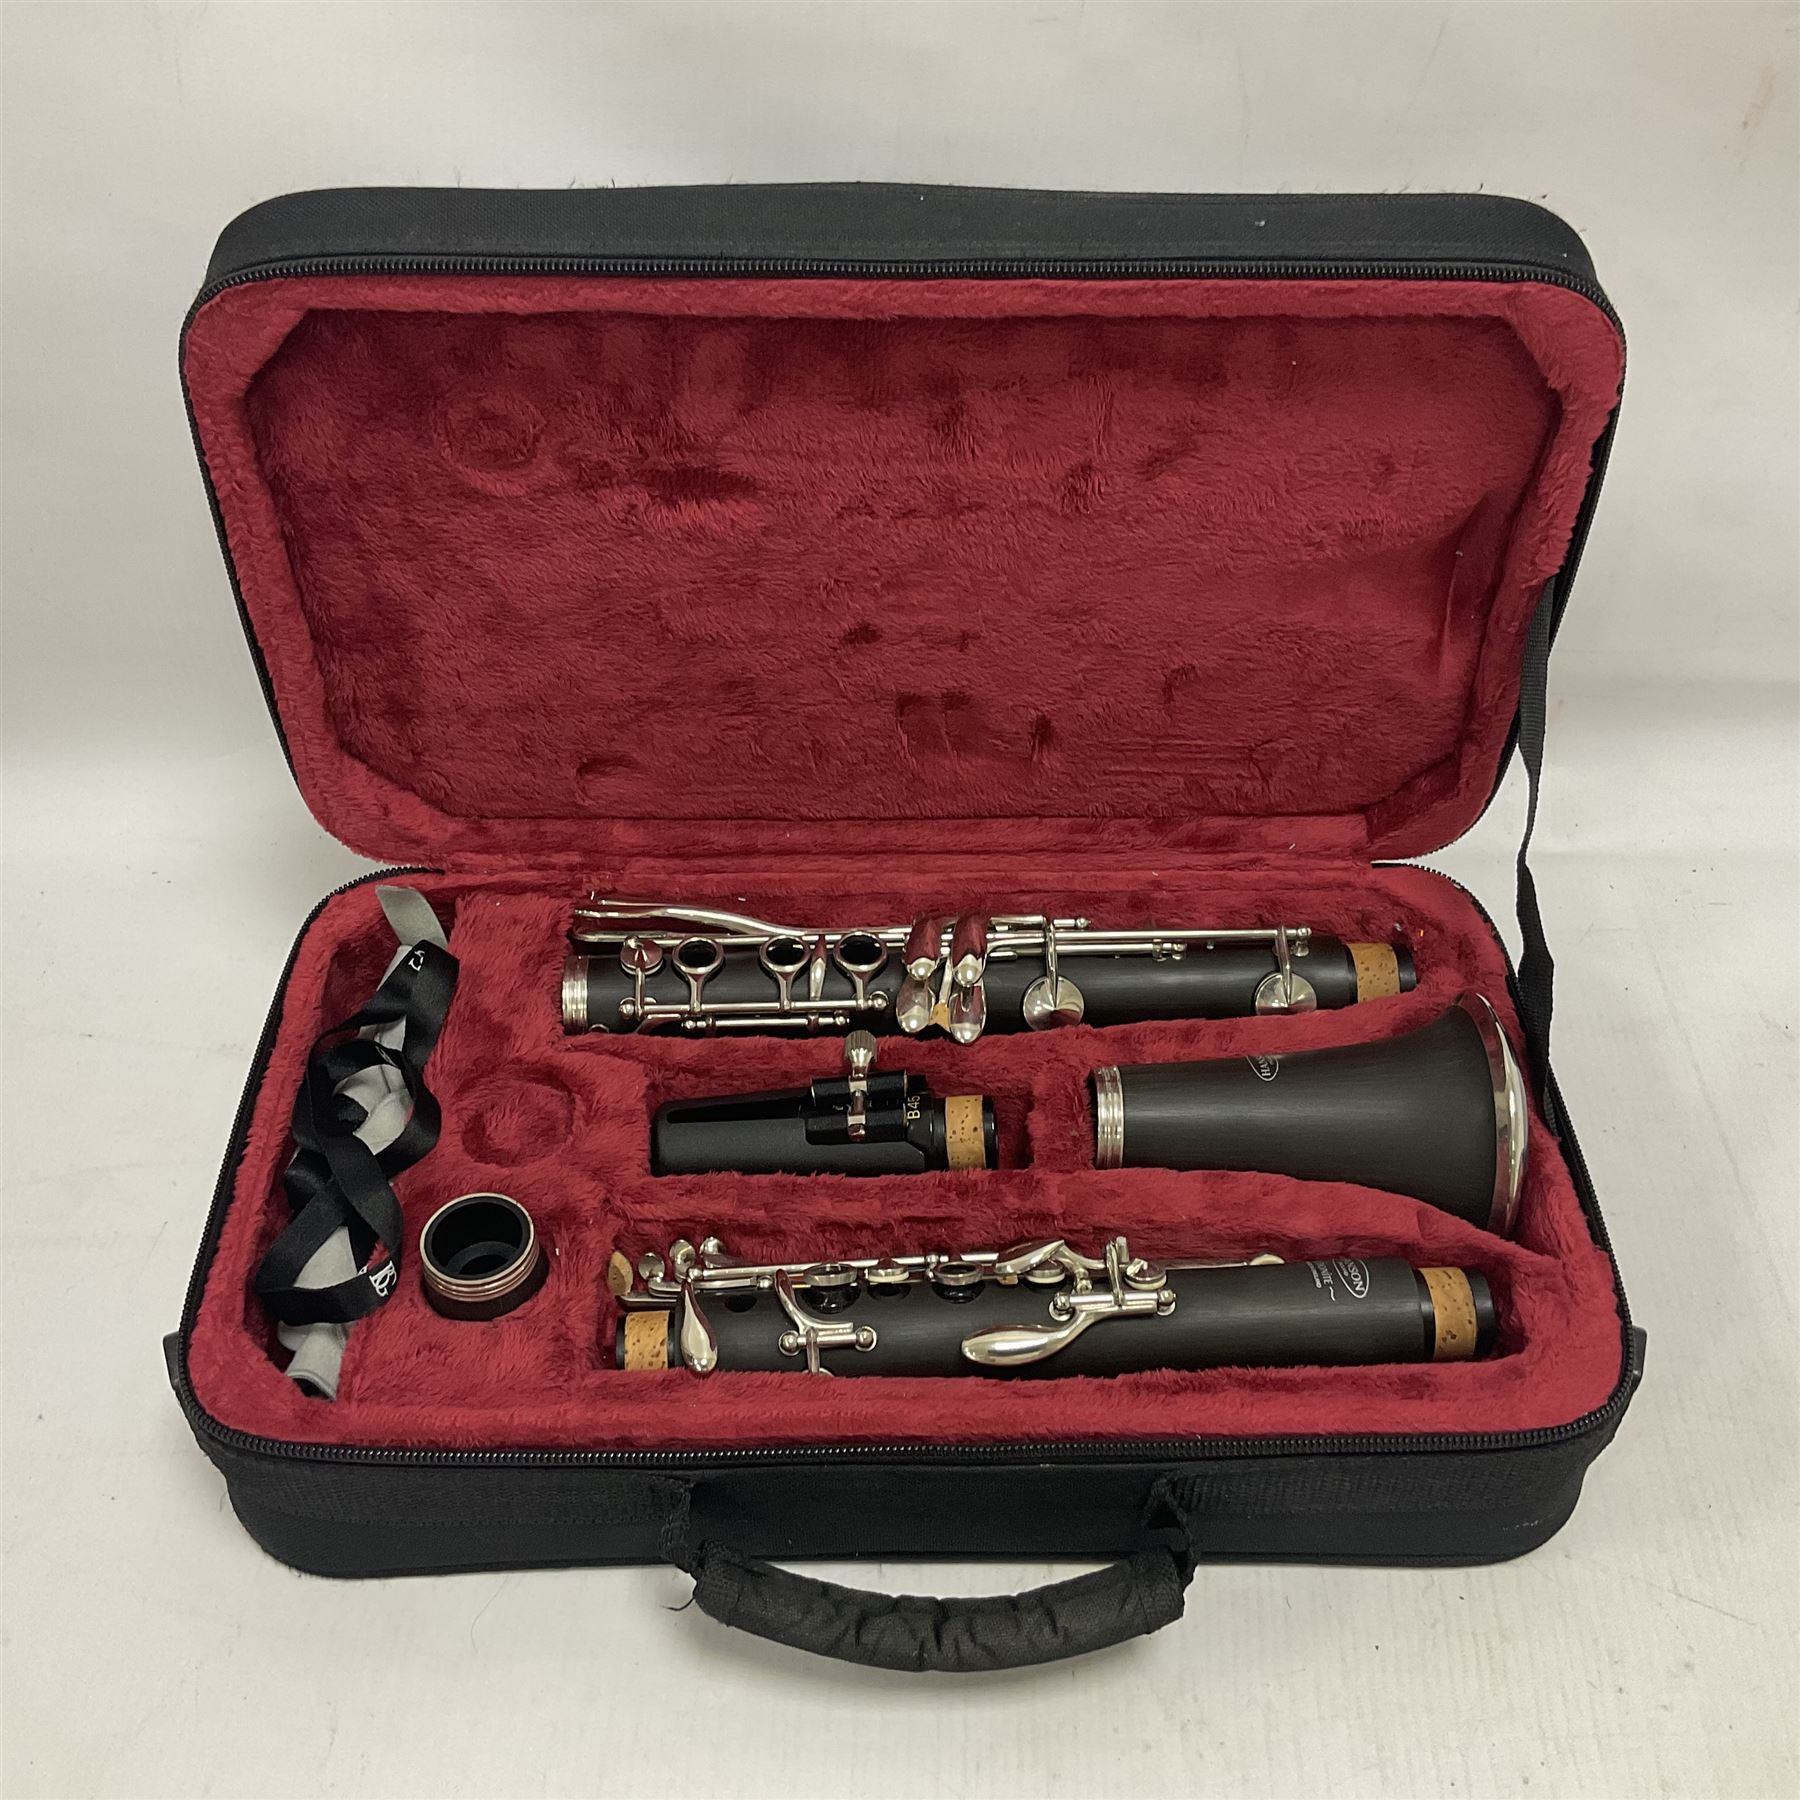 Hanson B Flat clarinet in a fitted case with accessories and three boxes of Vandoren reeds - Image 3 of 21